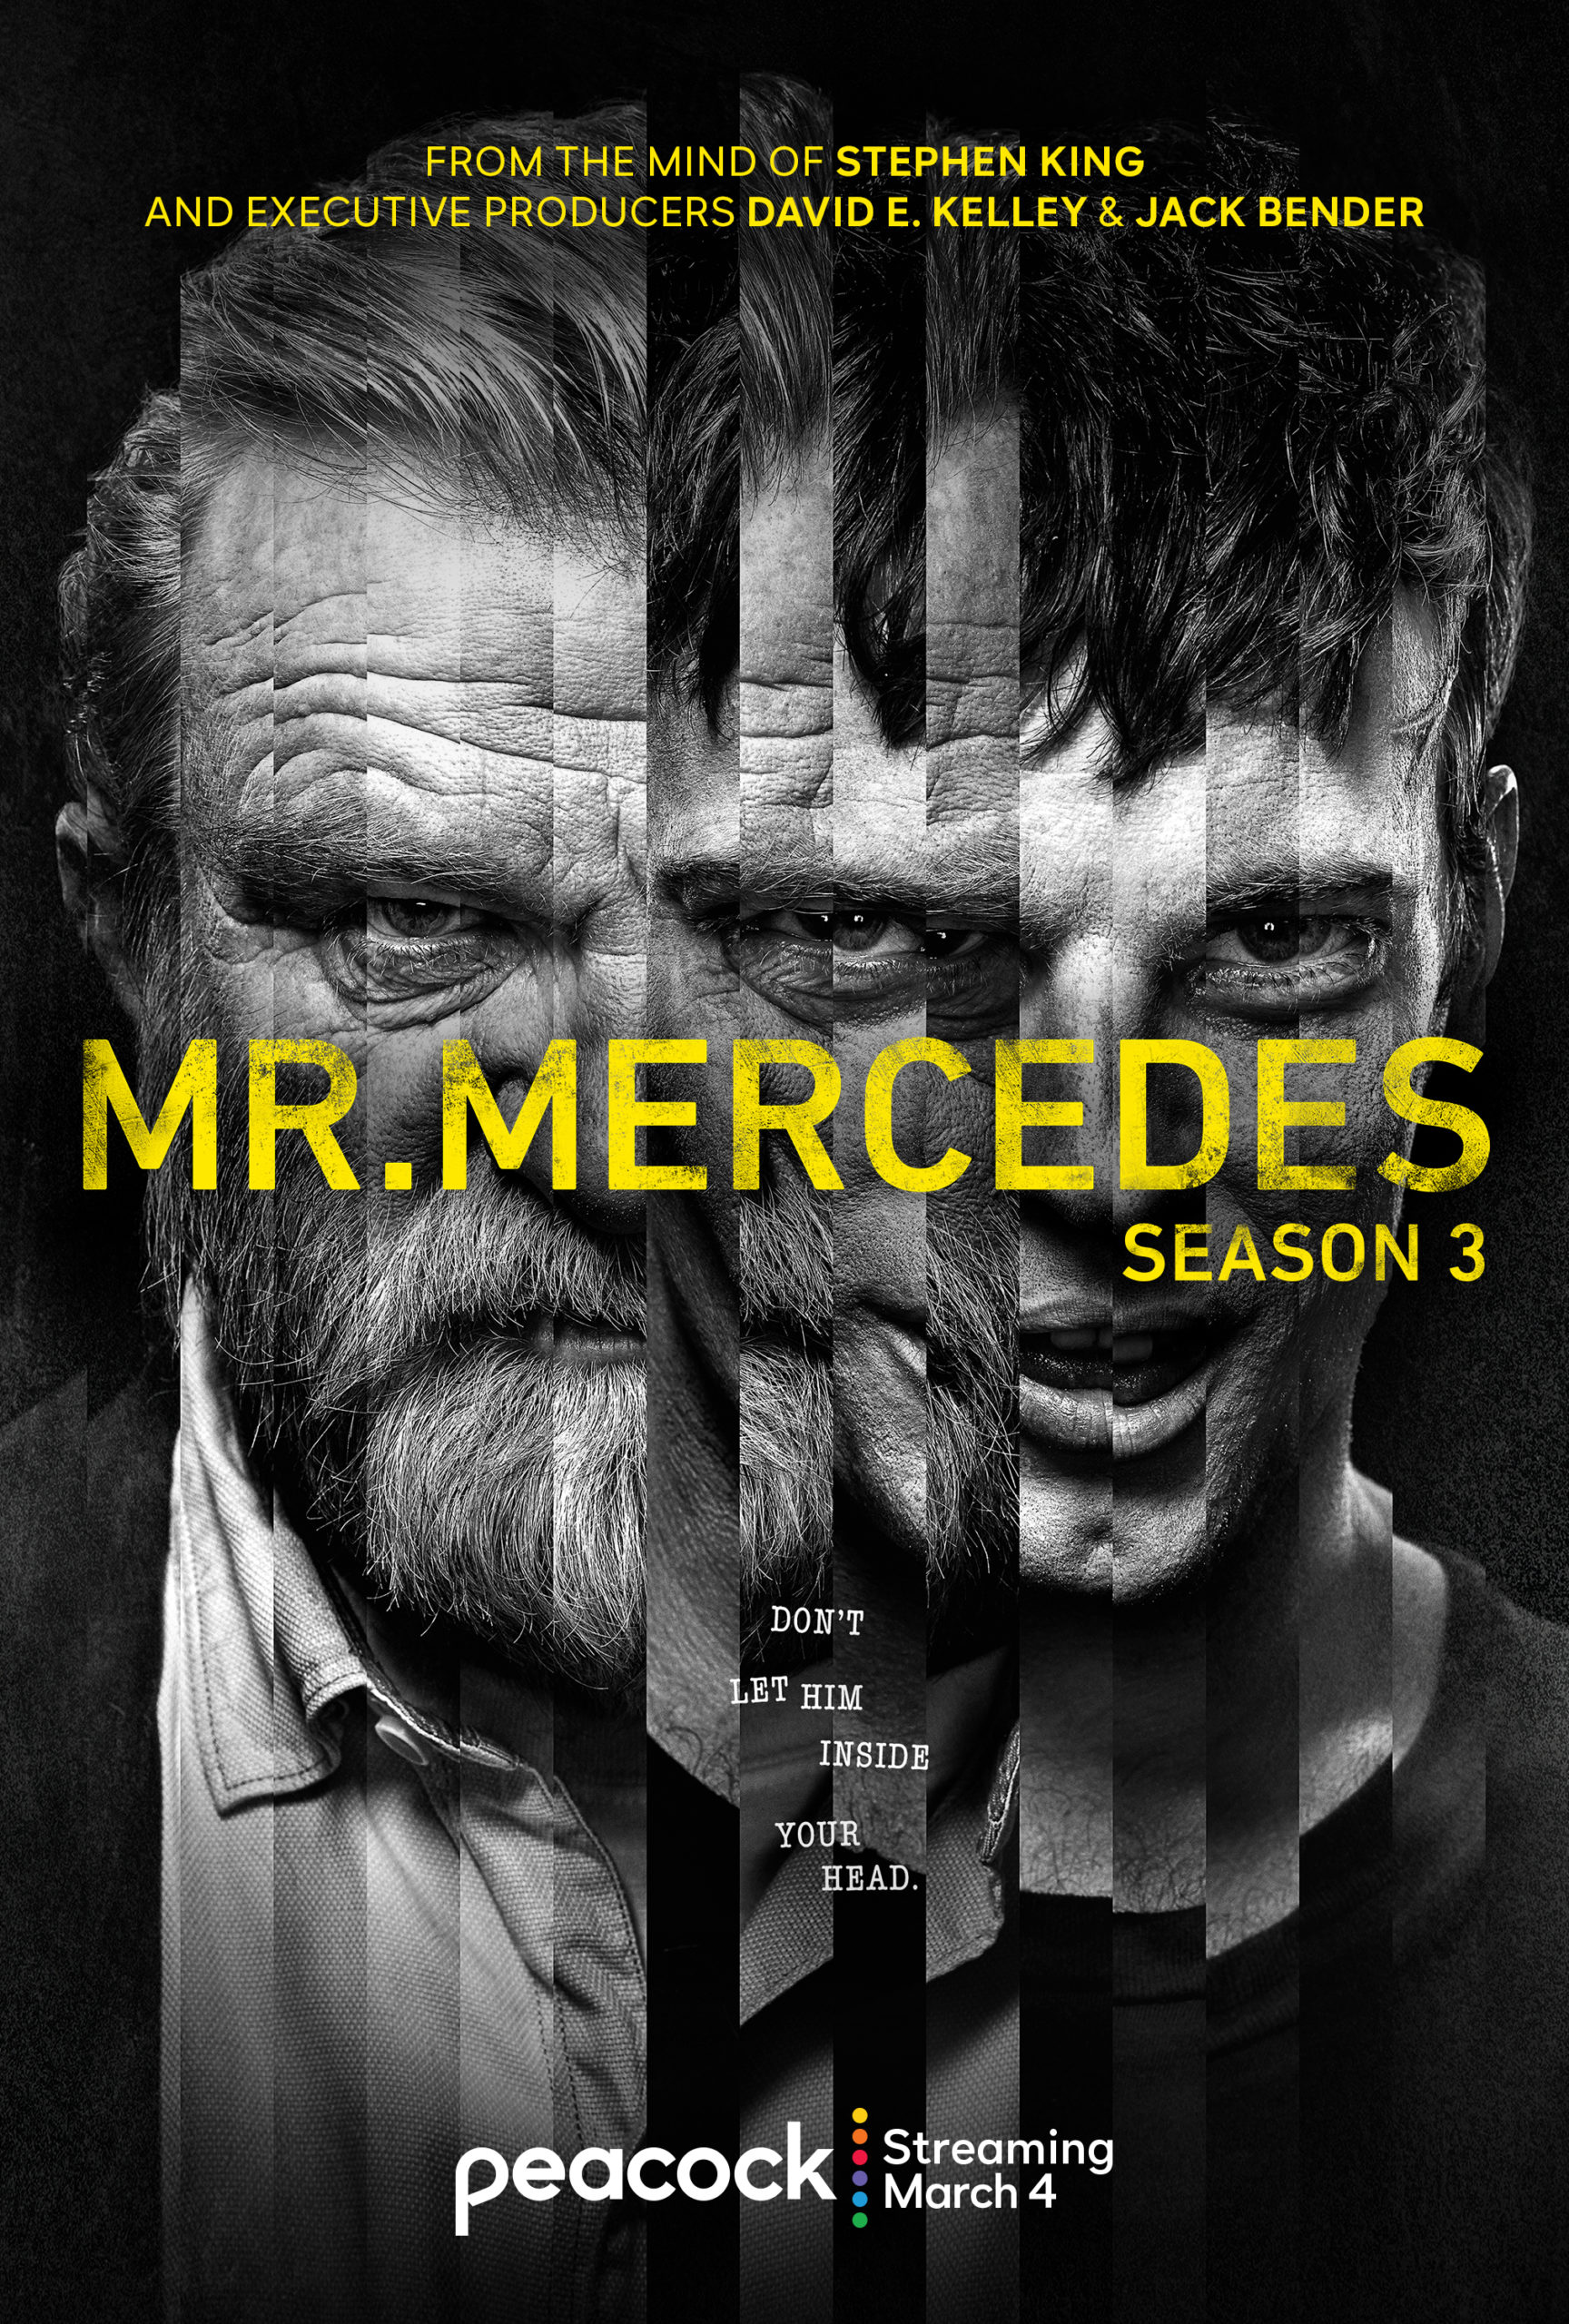 Maximiliano Hernández Talks About Mr.Mercedes Season 3 On Peacock [Exclusive Interview]